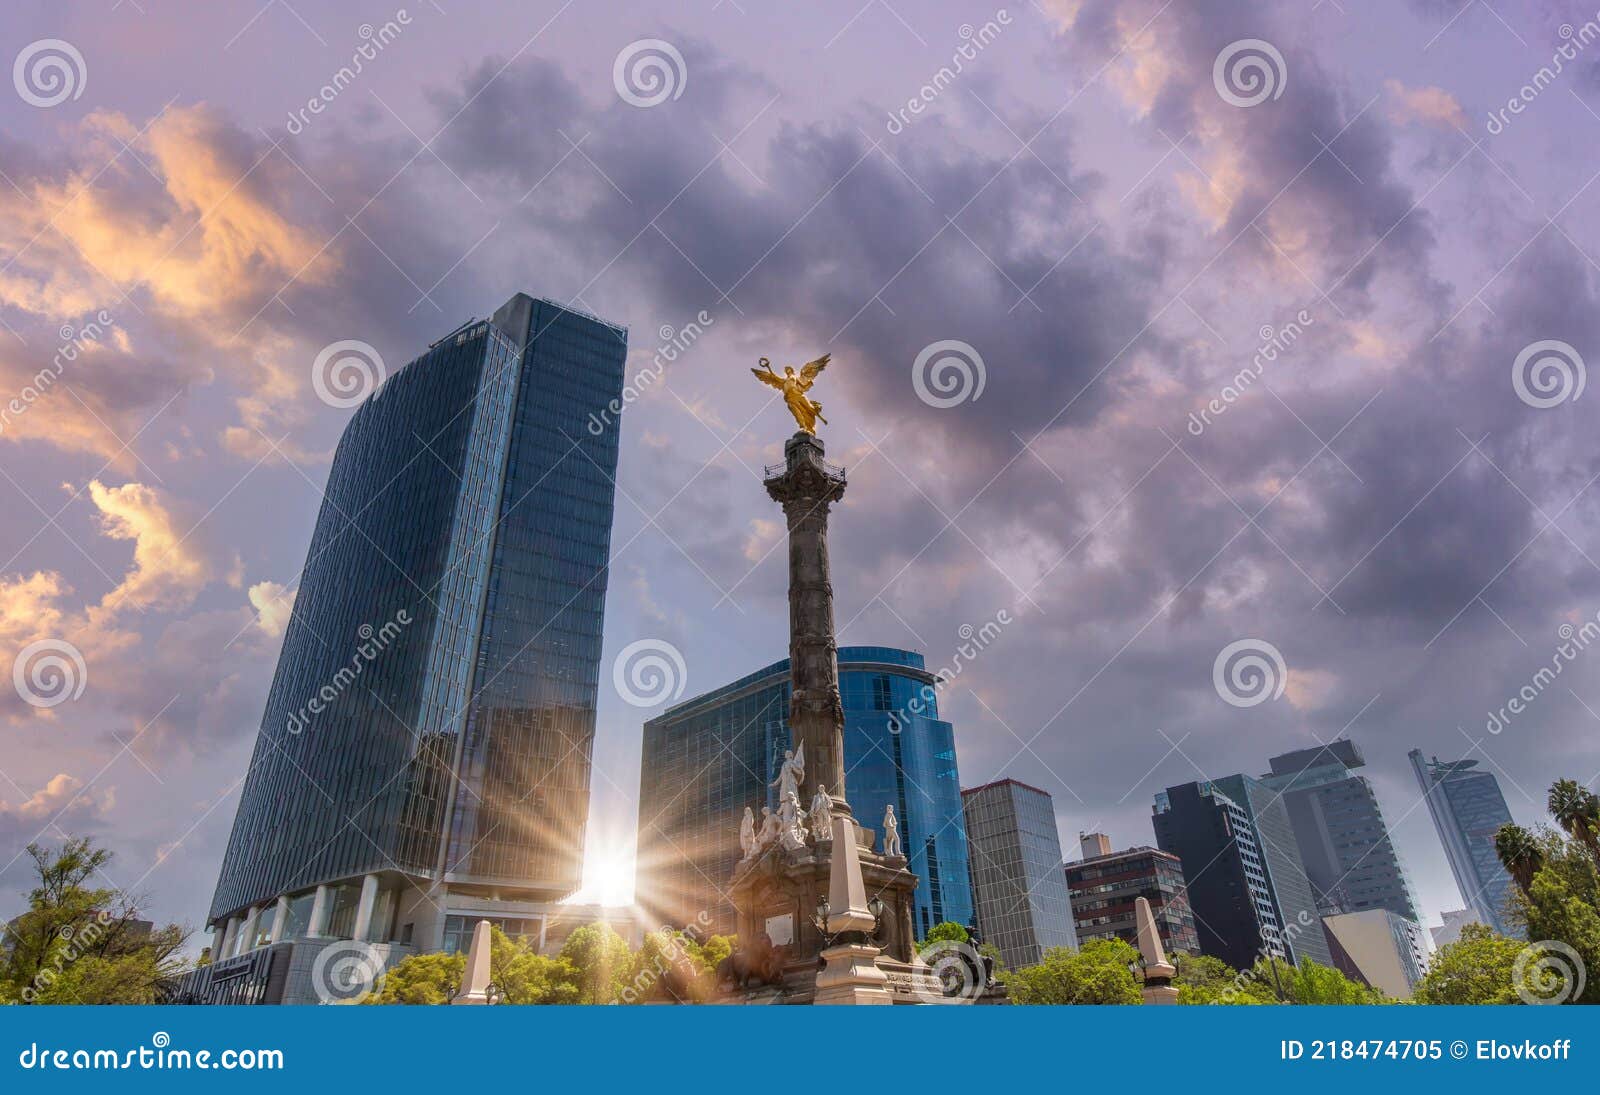 angel of independence monument located on reforma street near historic center of mexico city